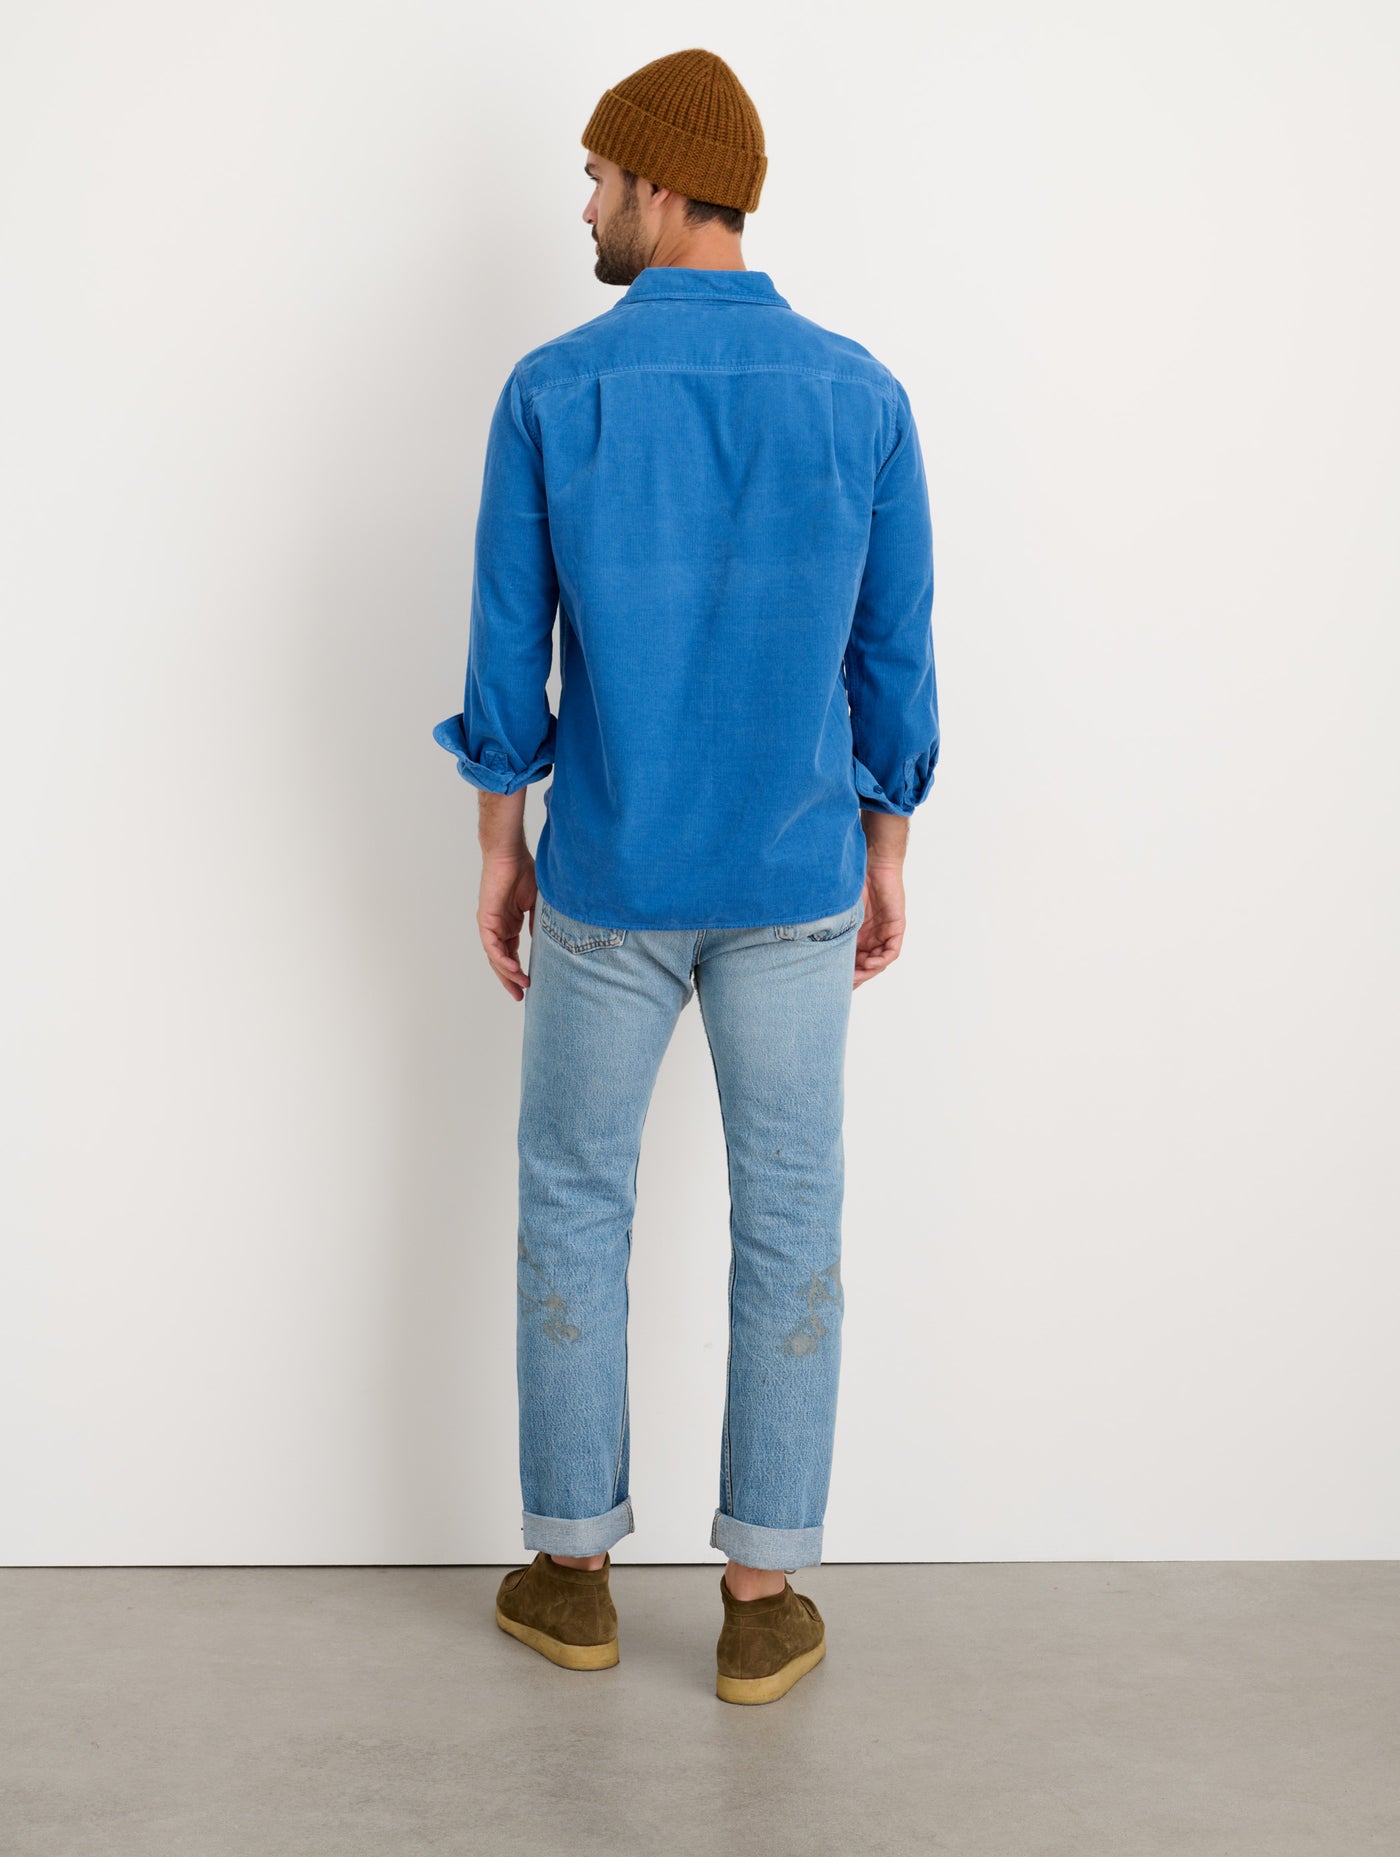 Carter Popover Shirt in Fine Wale Corduroy